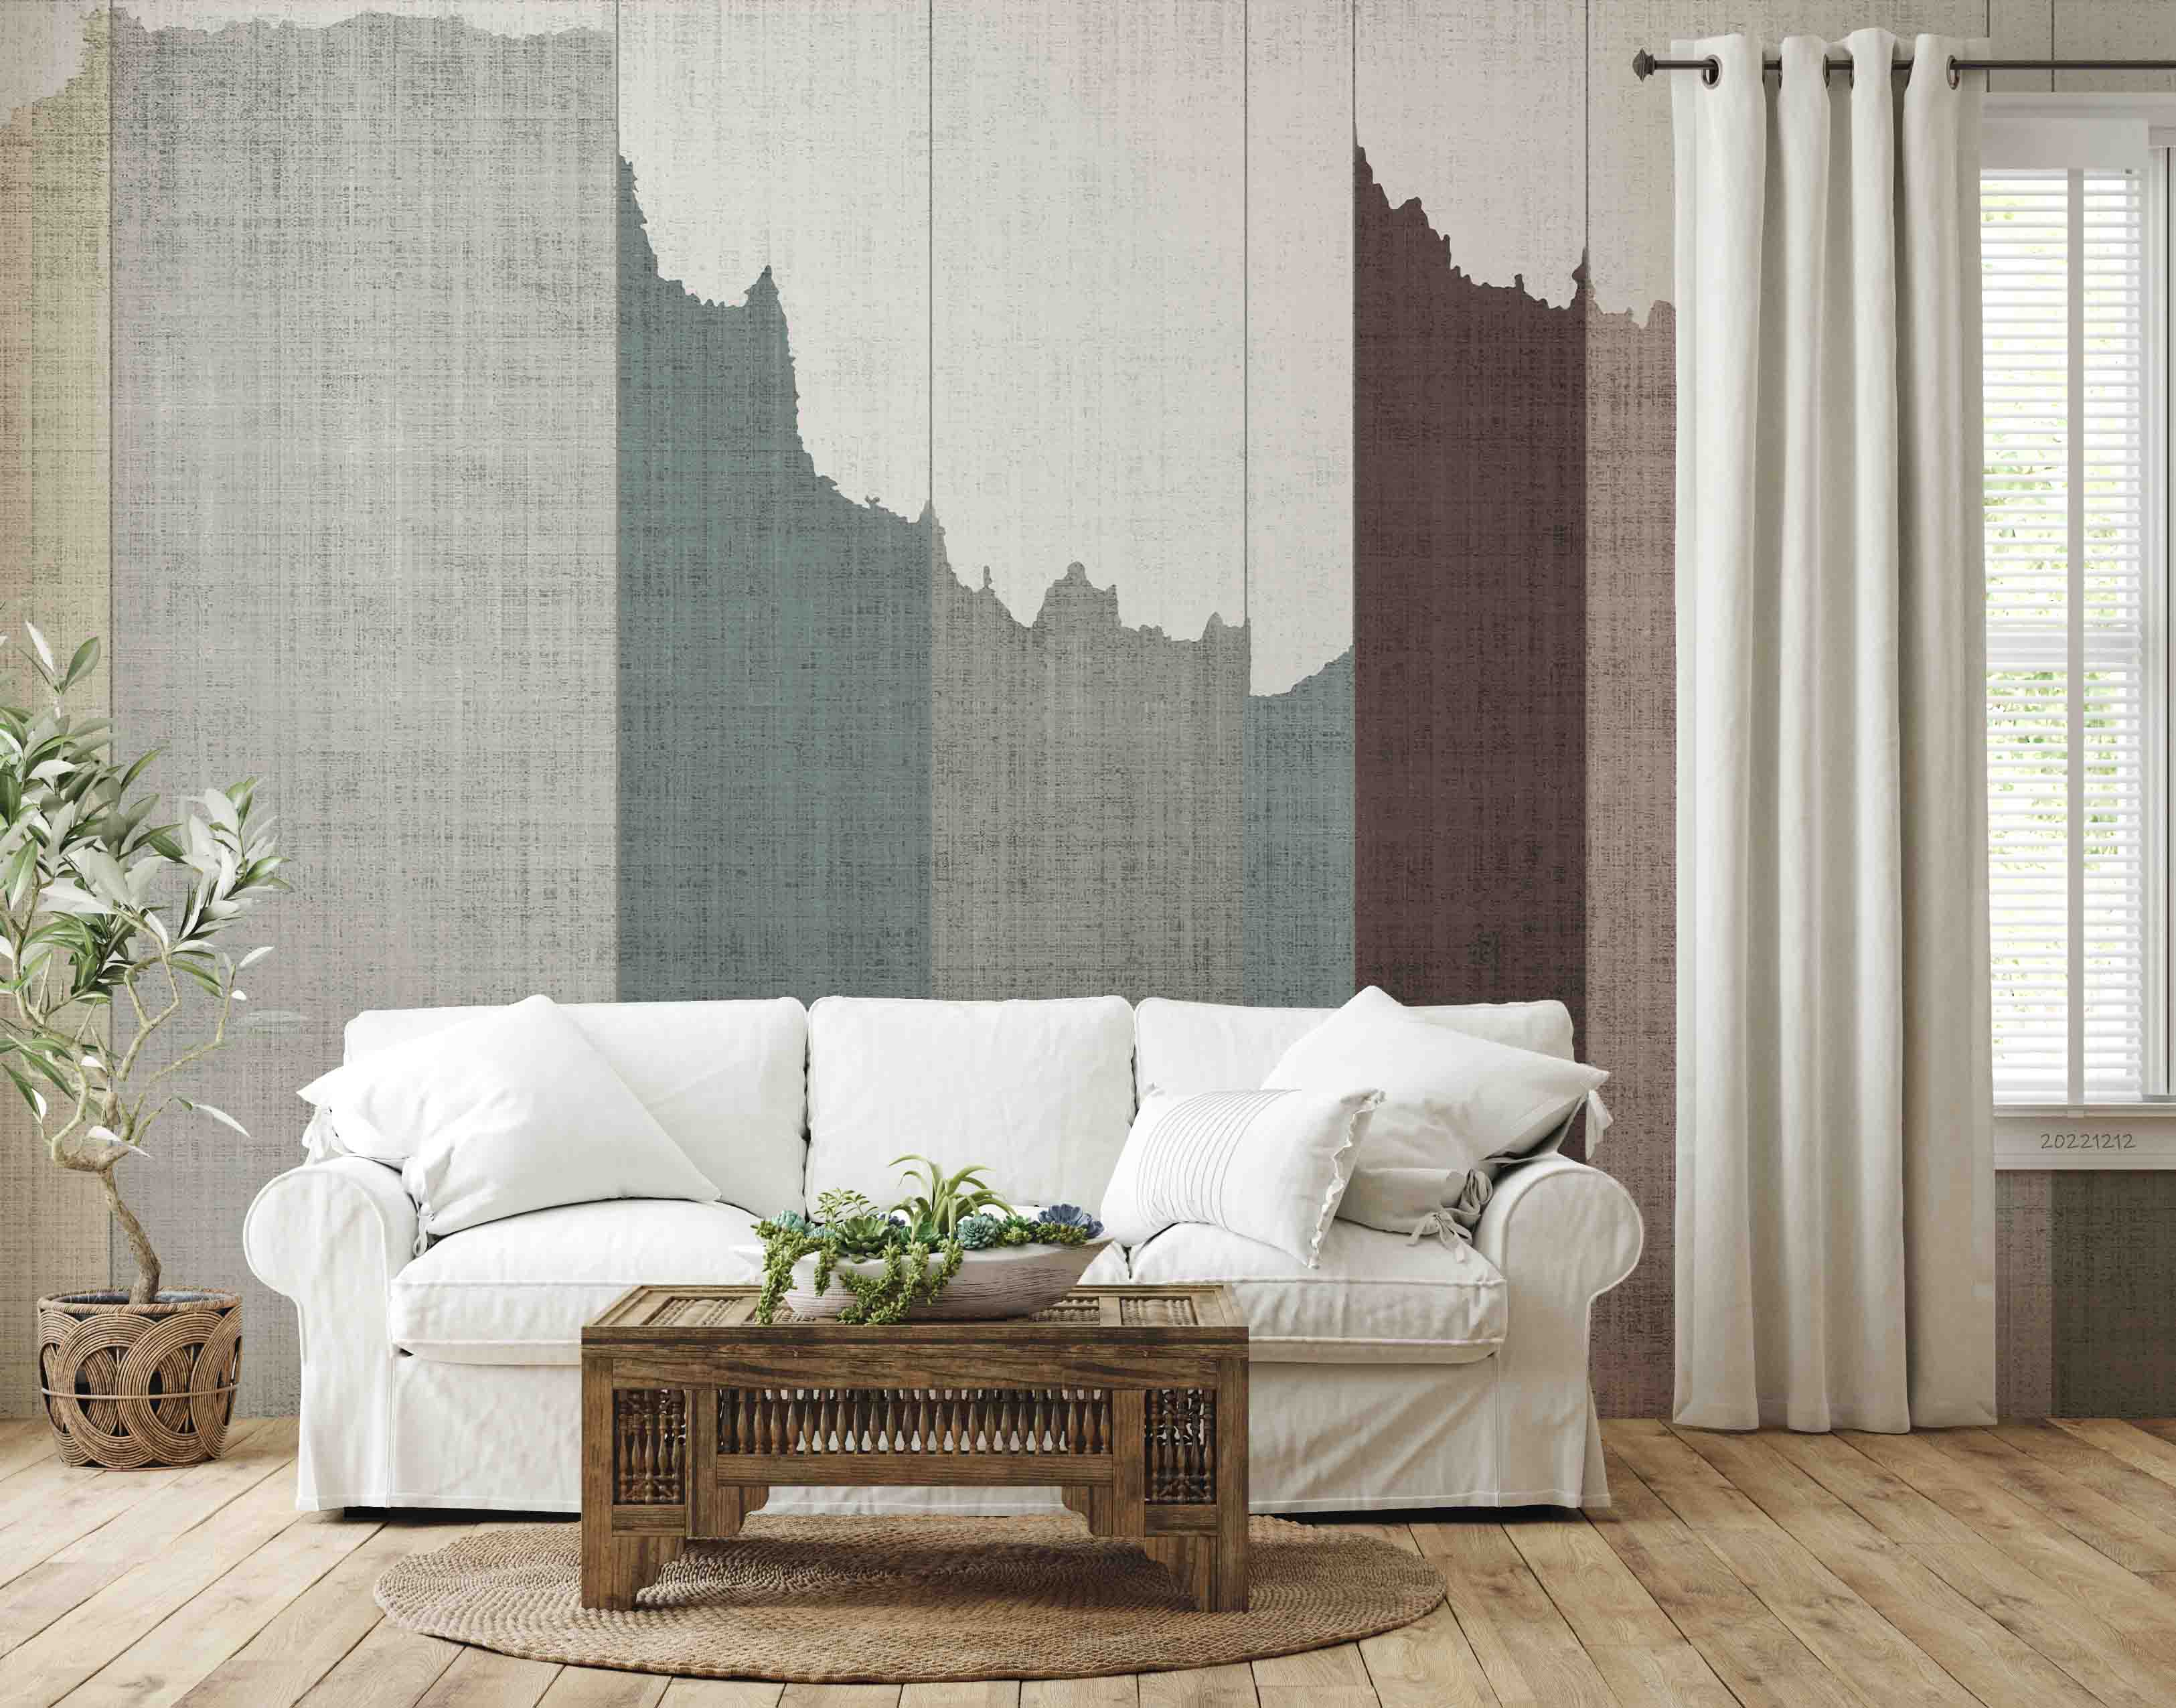 3D Vintage Smudged Knitting Background Wall Mural Wallpaper GD 1773- Jess Art Decoration